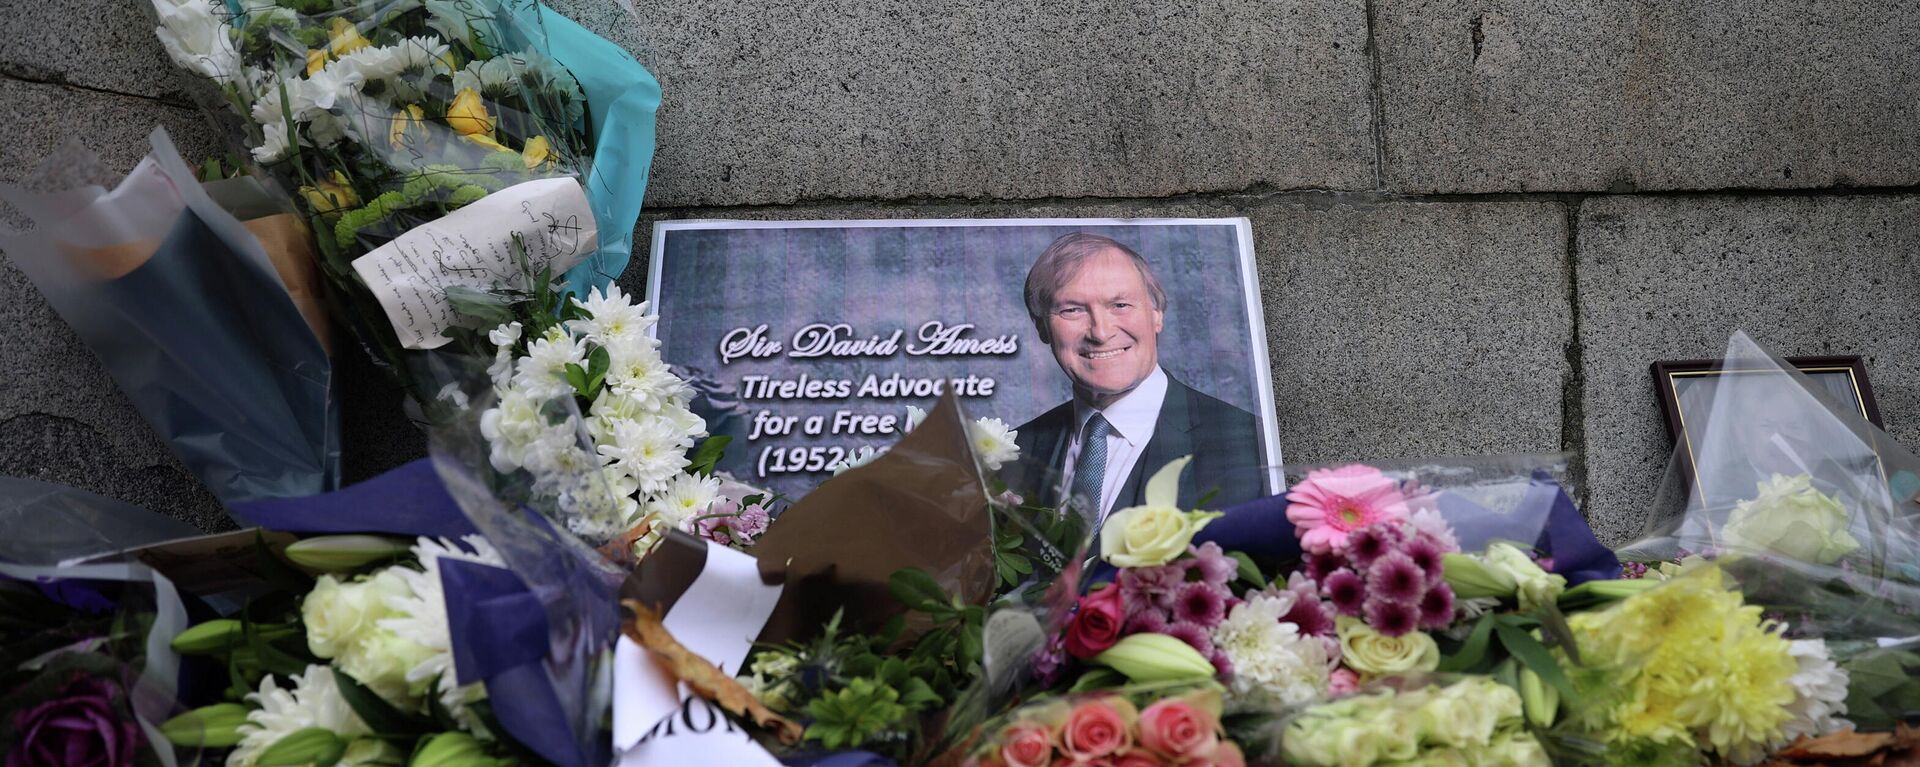 Floral tributes to British MP David Amess, who was stabbed to death during a meeting with constituents, lay outside the Houses of Parliament, in London, Britain, October 19, 2021 - Sputnik International, 1920, 20.10.2021